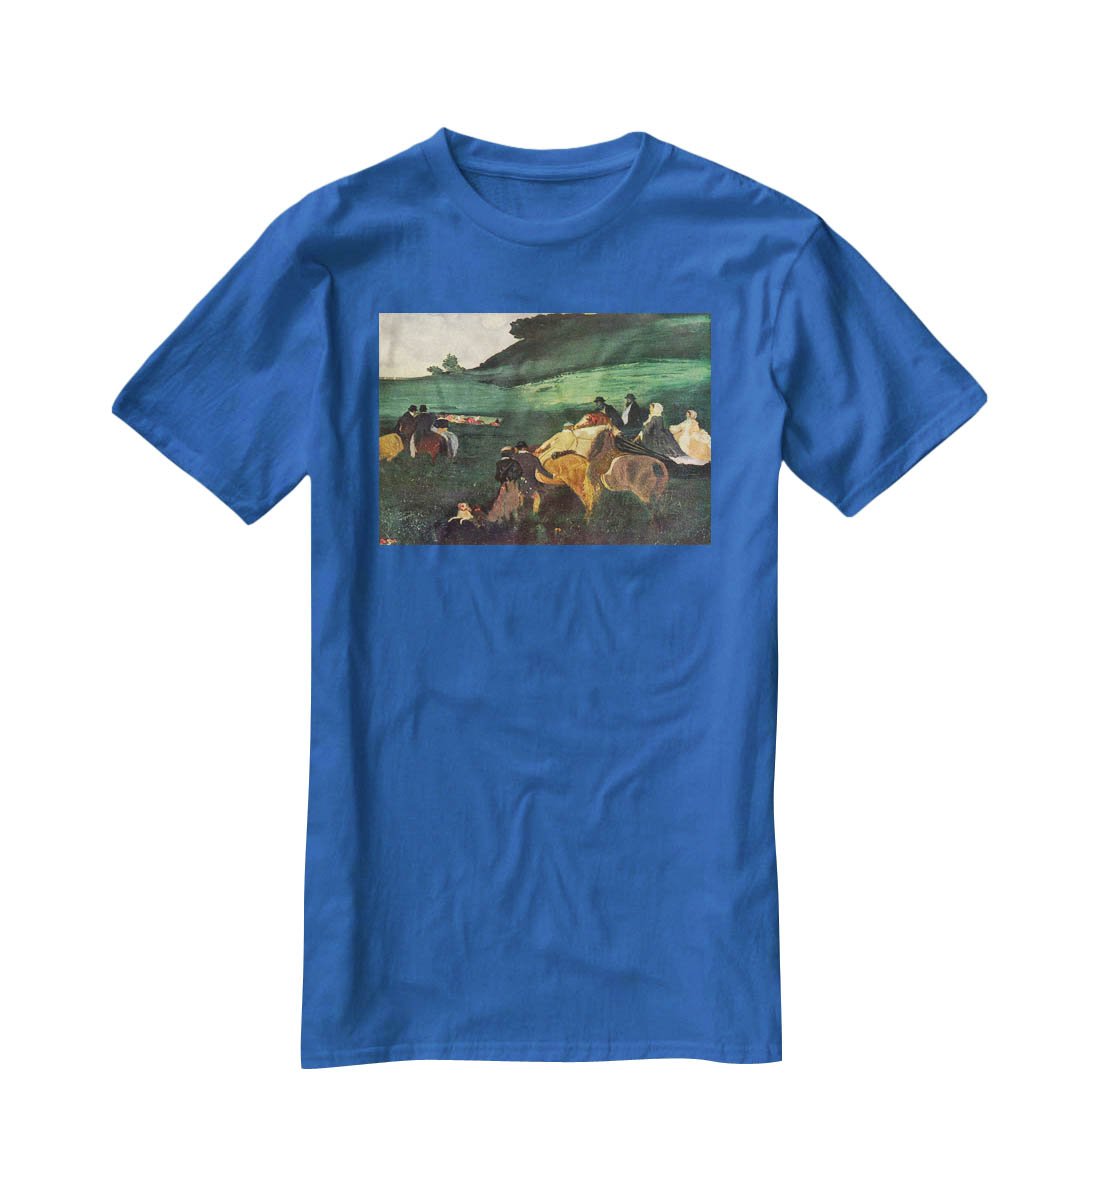 Riders in the landscape by Degas T-Shirt - Canvas Art Rocks - 2